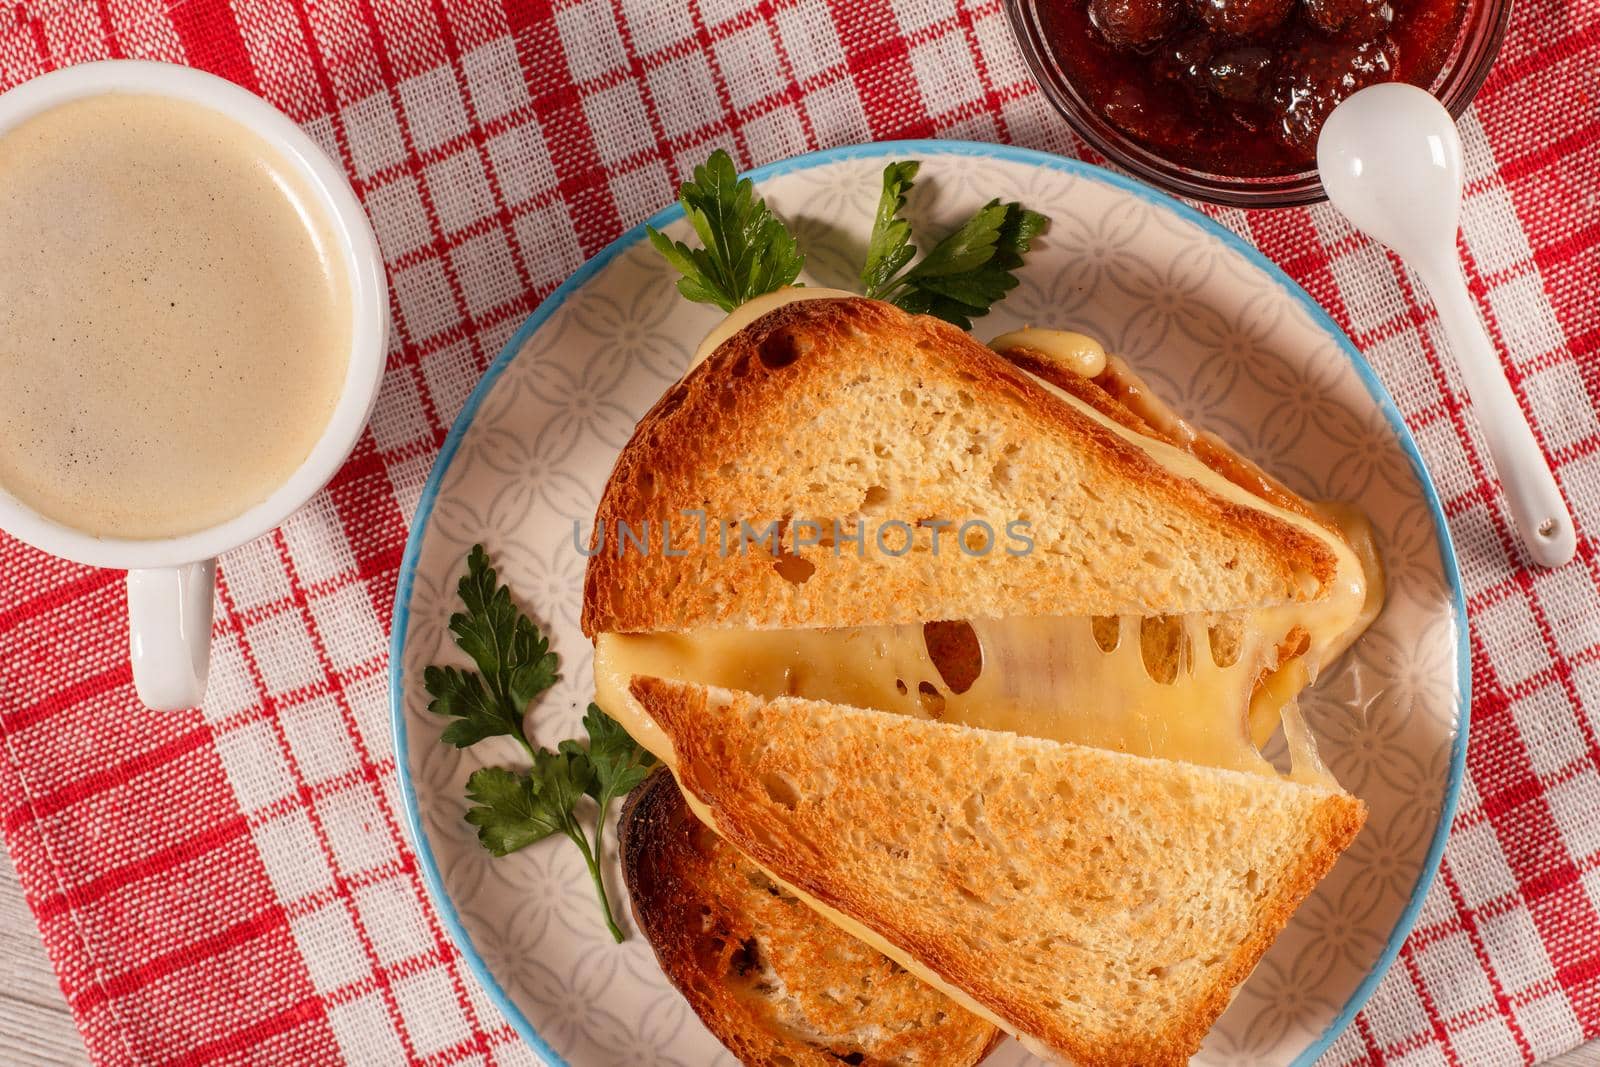 Toasted slices of bread with cheese and green parsley on white plate, cup of coffee, glass bowl with strawberry jam and spoon with red kitchen napkin. Top view. Good food for breakfast